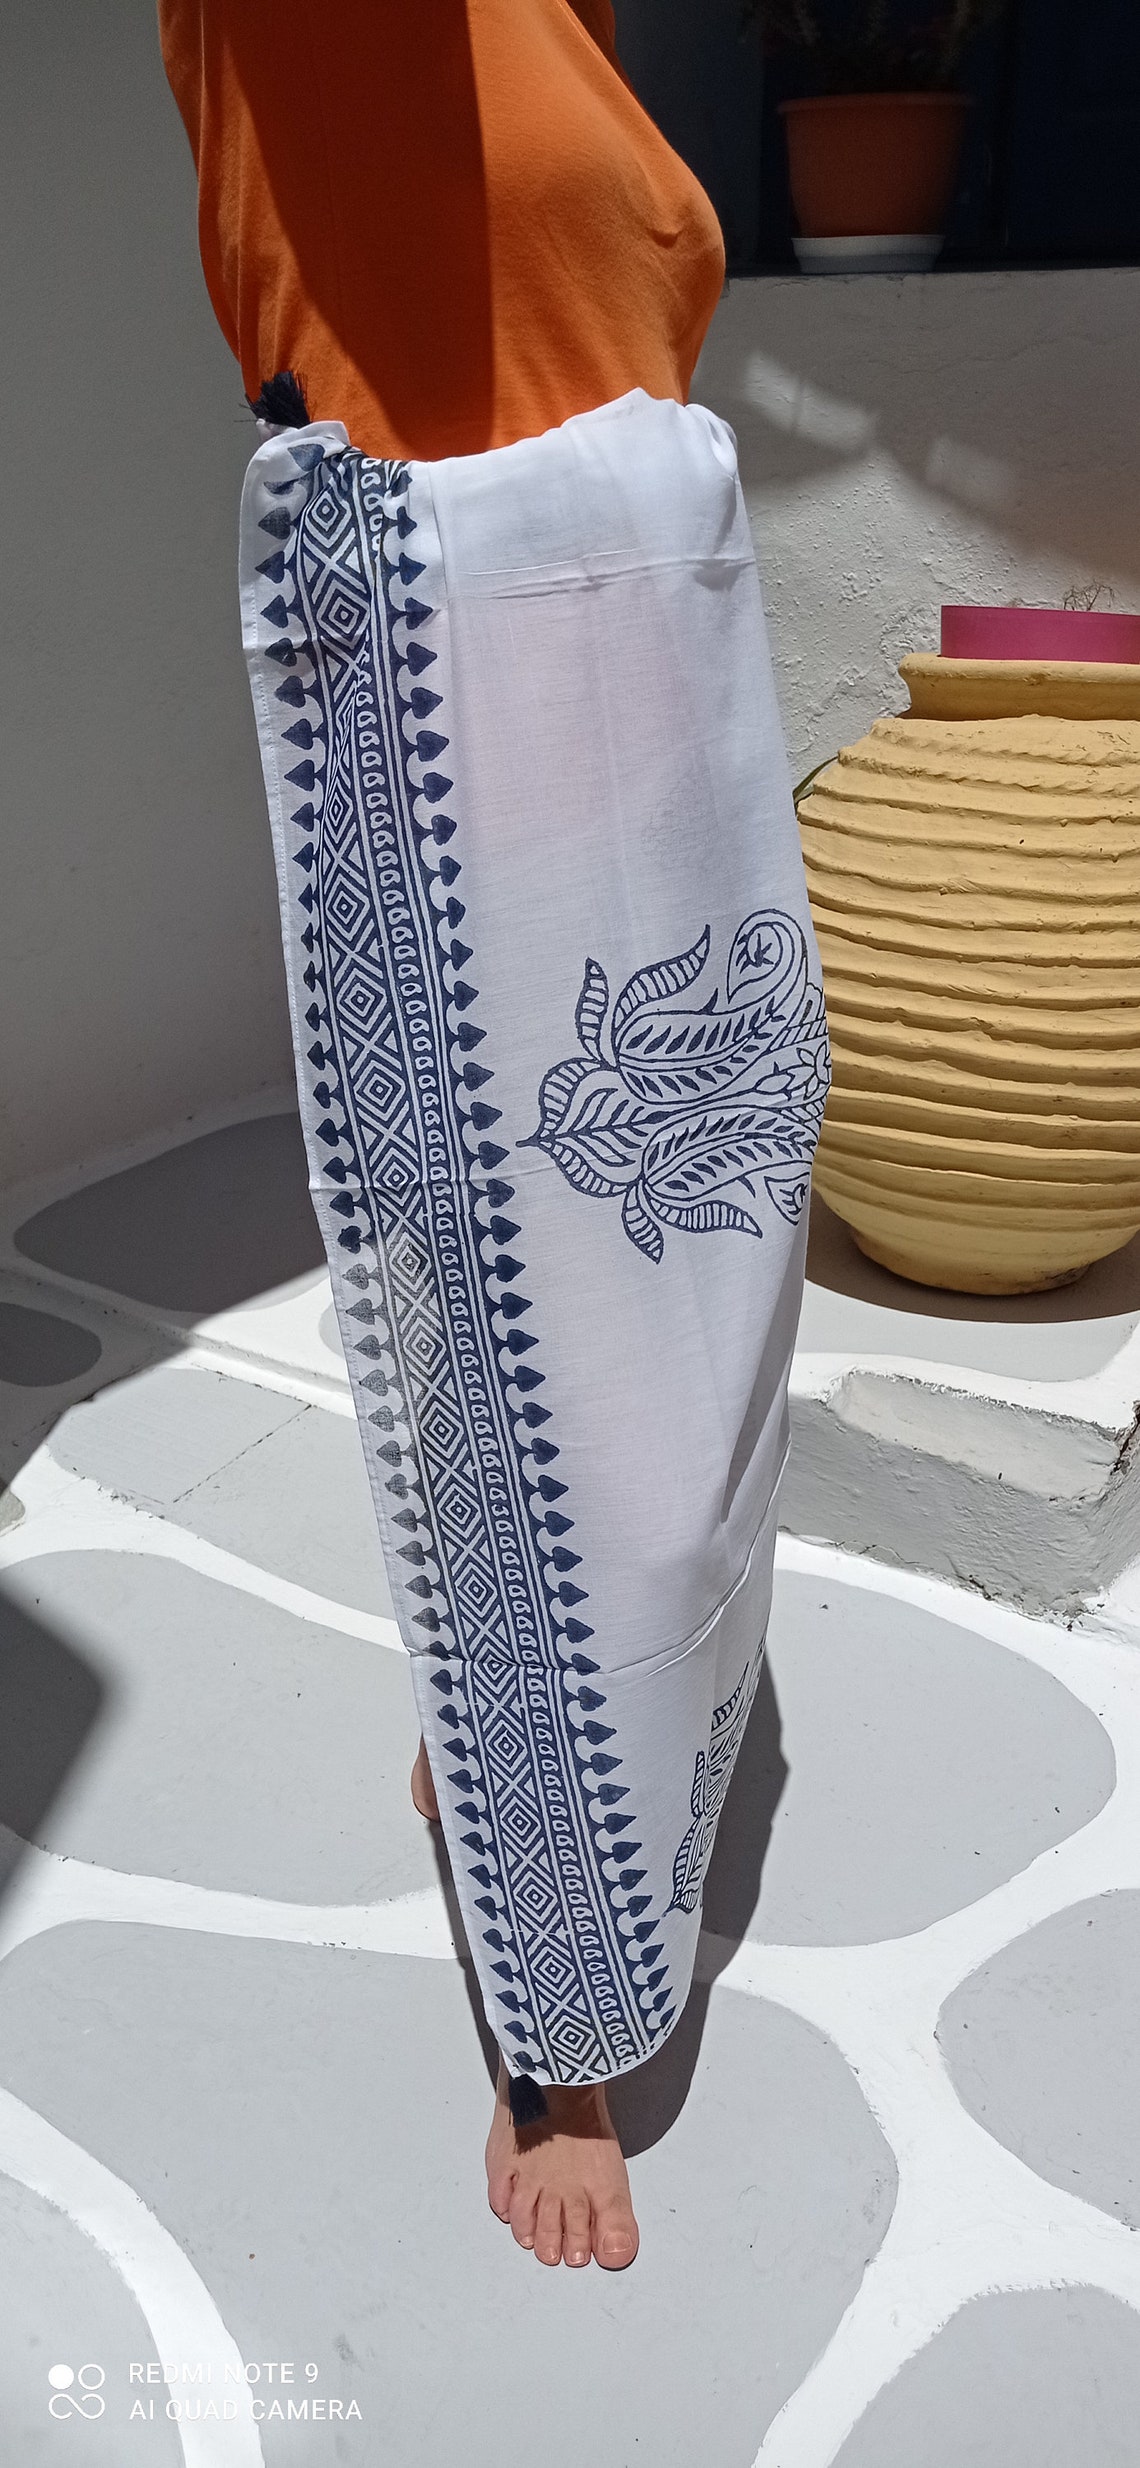 Greek Painted Traditional Design Pareo Sarong Beach Wear - Etsy